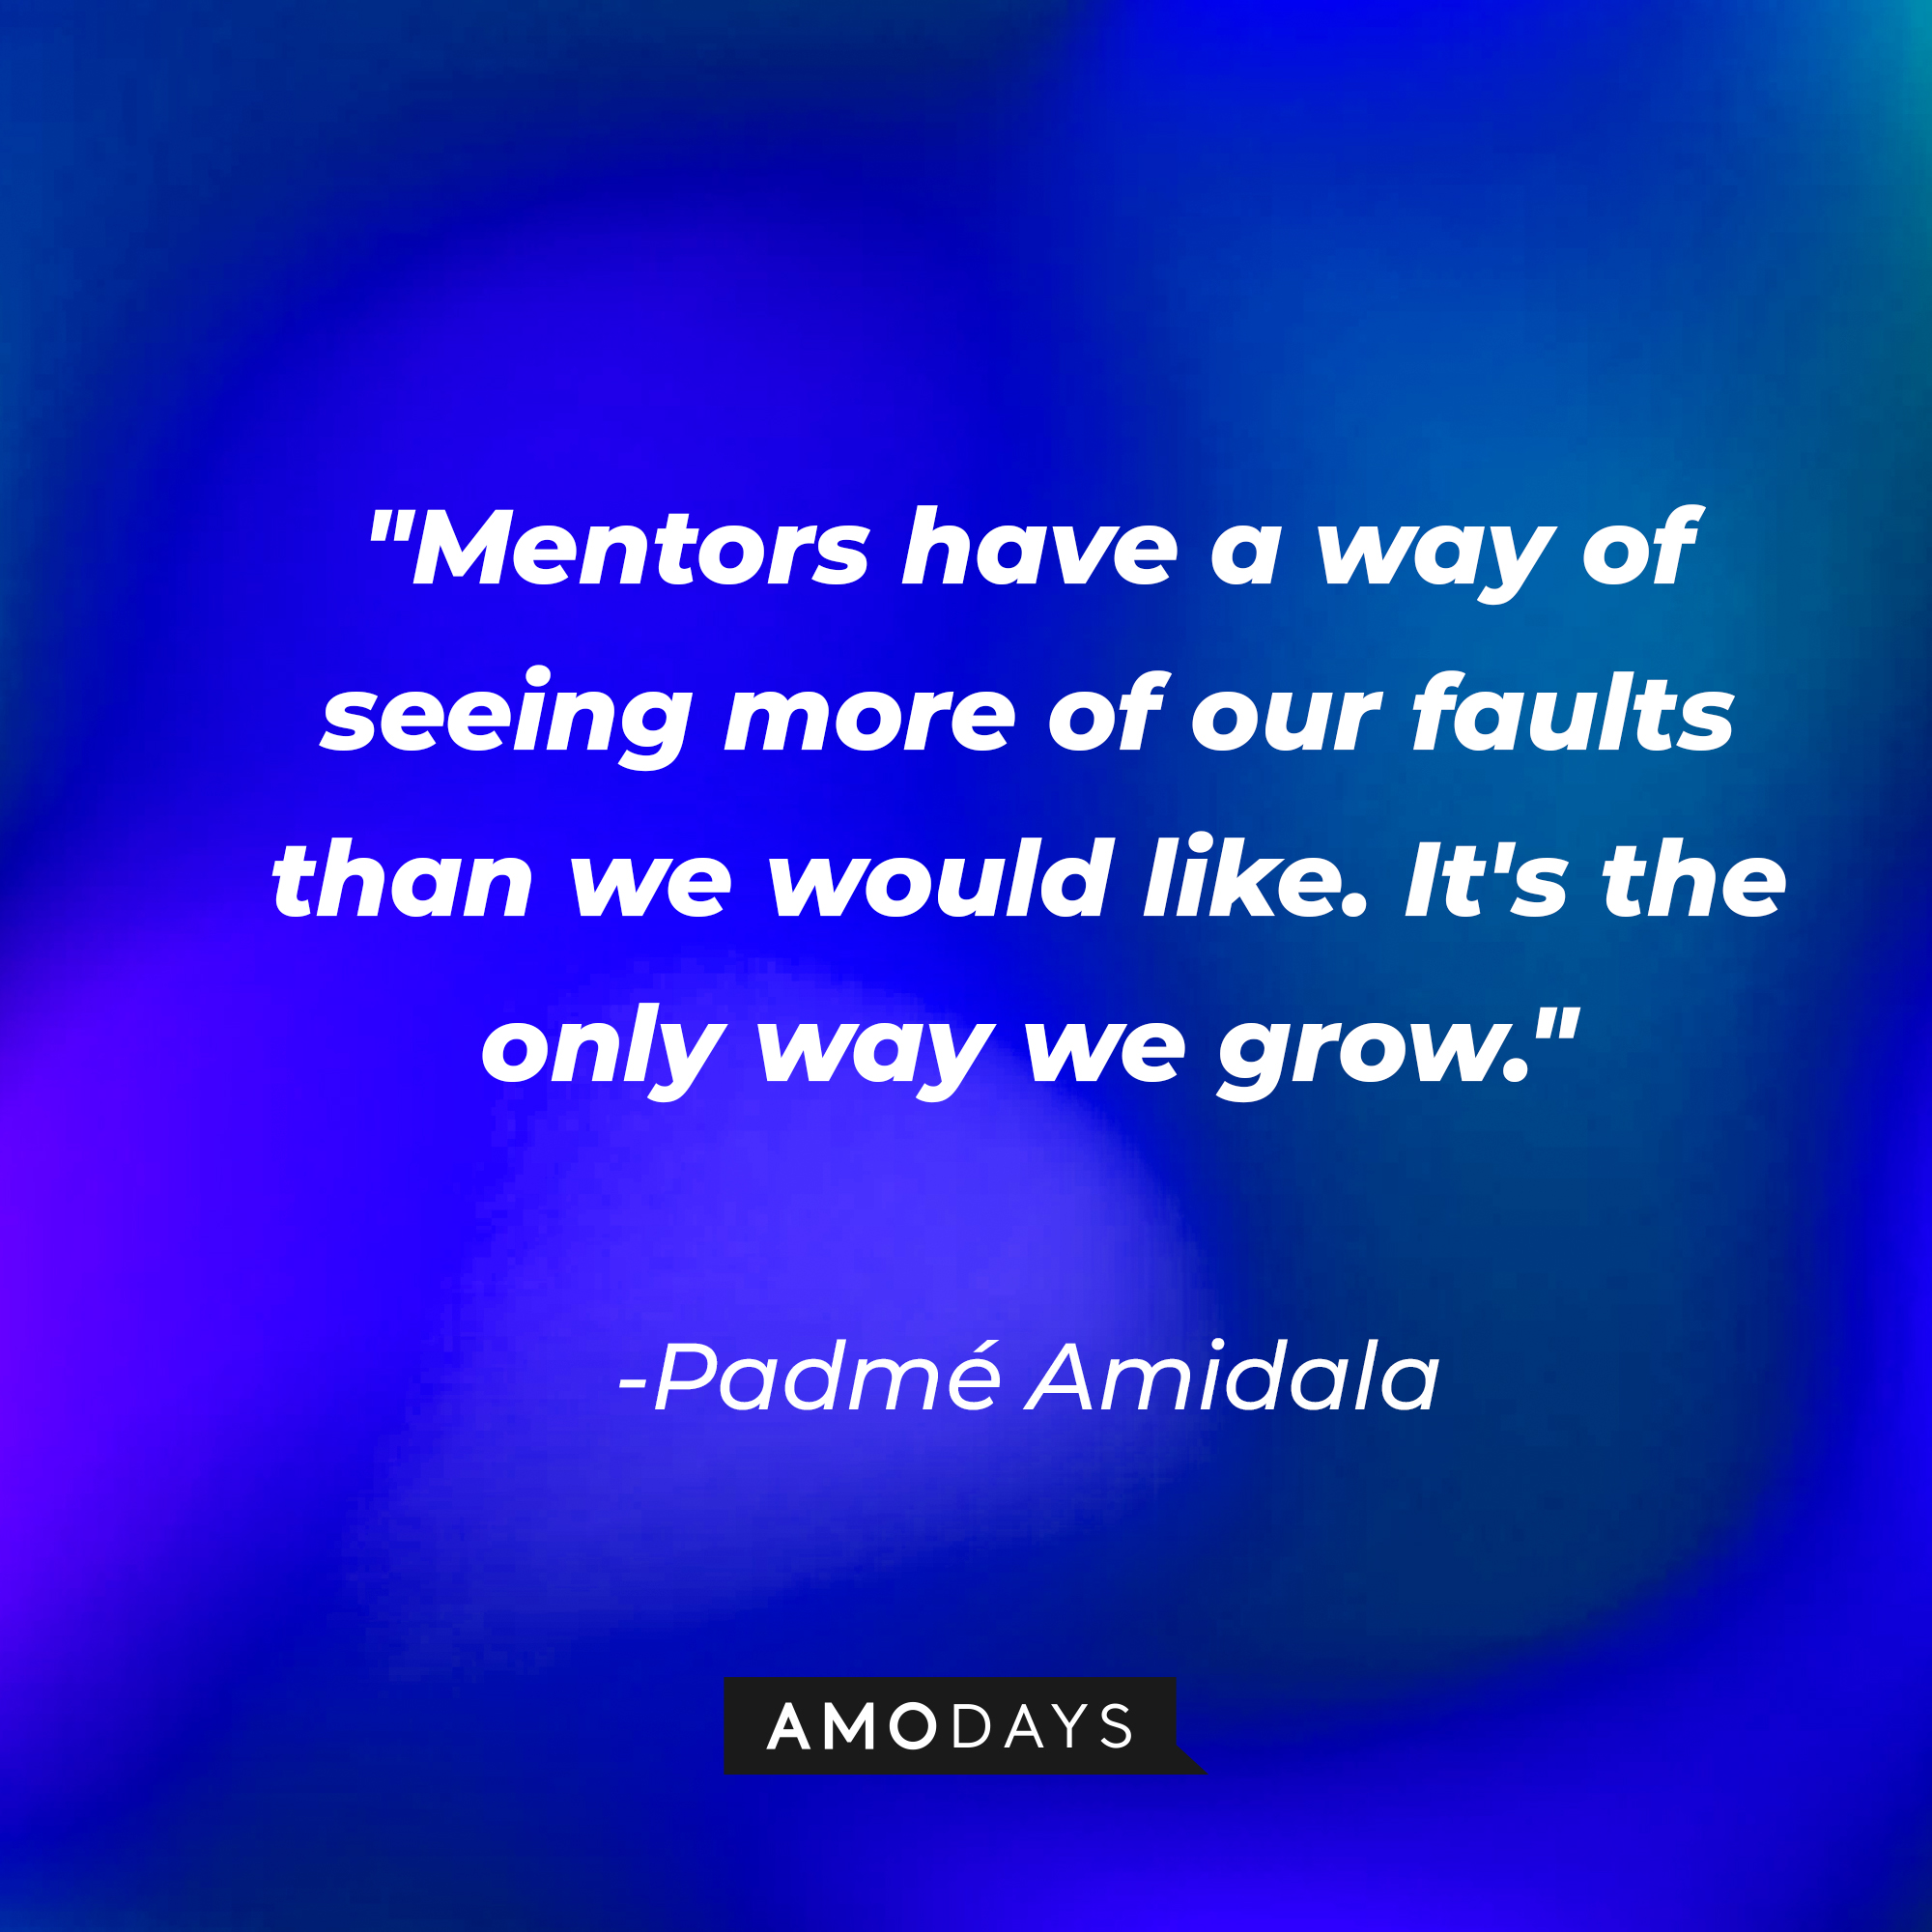 Padmé Amidala's quote: "Mentors have a way of seeing more of our faults than we would like. It's the only way we grow." | Source: AmoDays